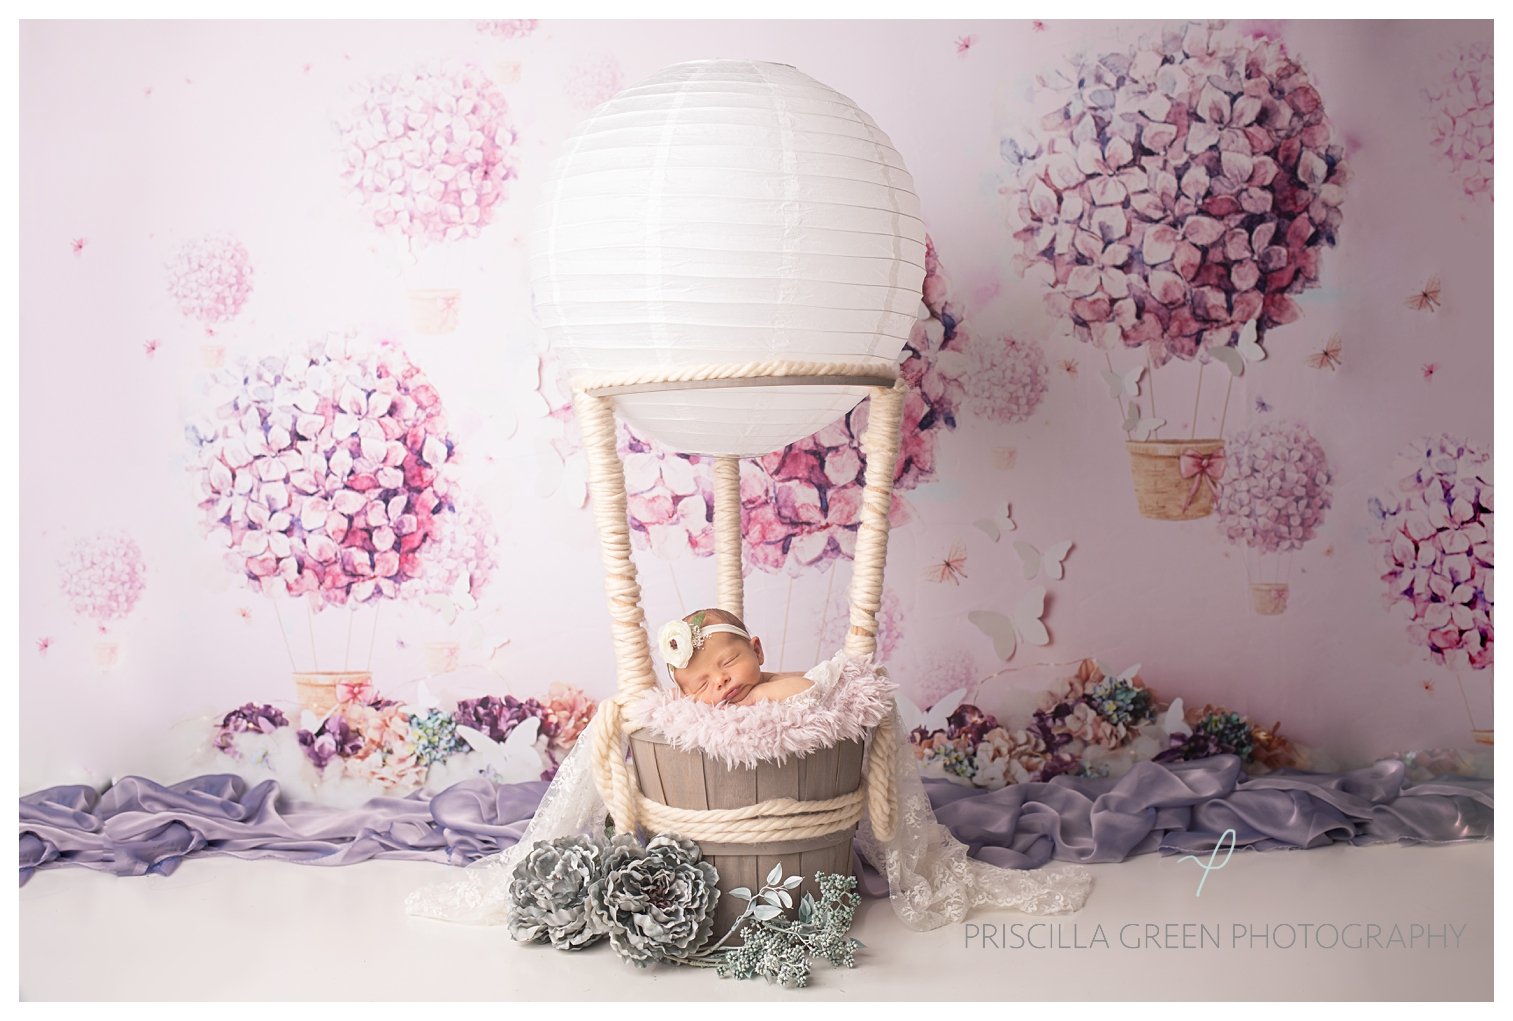  hot air balloon with hot airballoon butterfly backdrop and light wood floor a client favorite set 